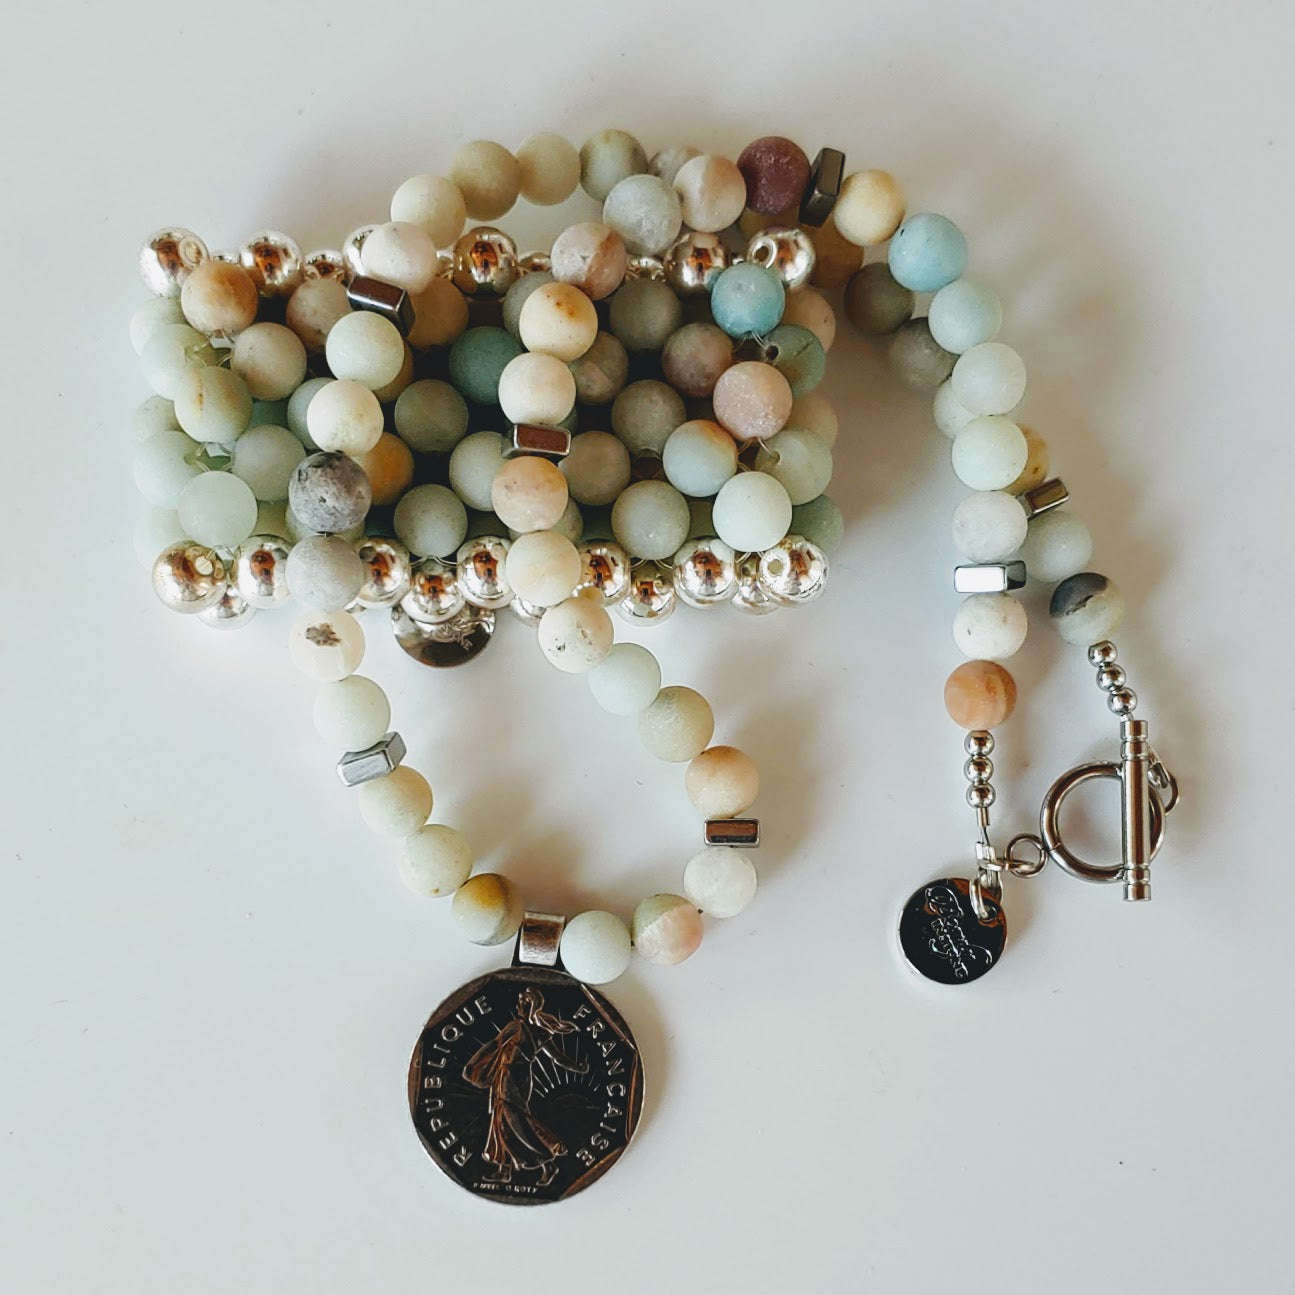 Matte Amazonite Necklace With Coin